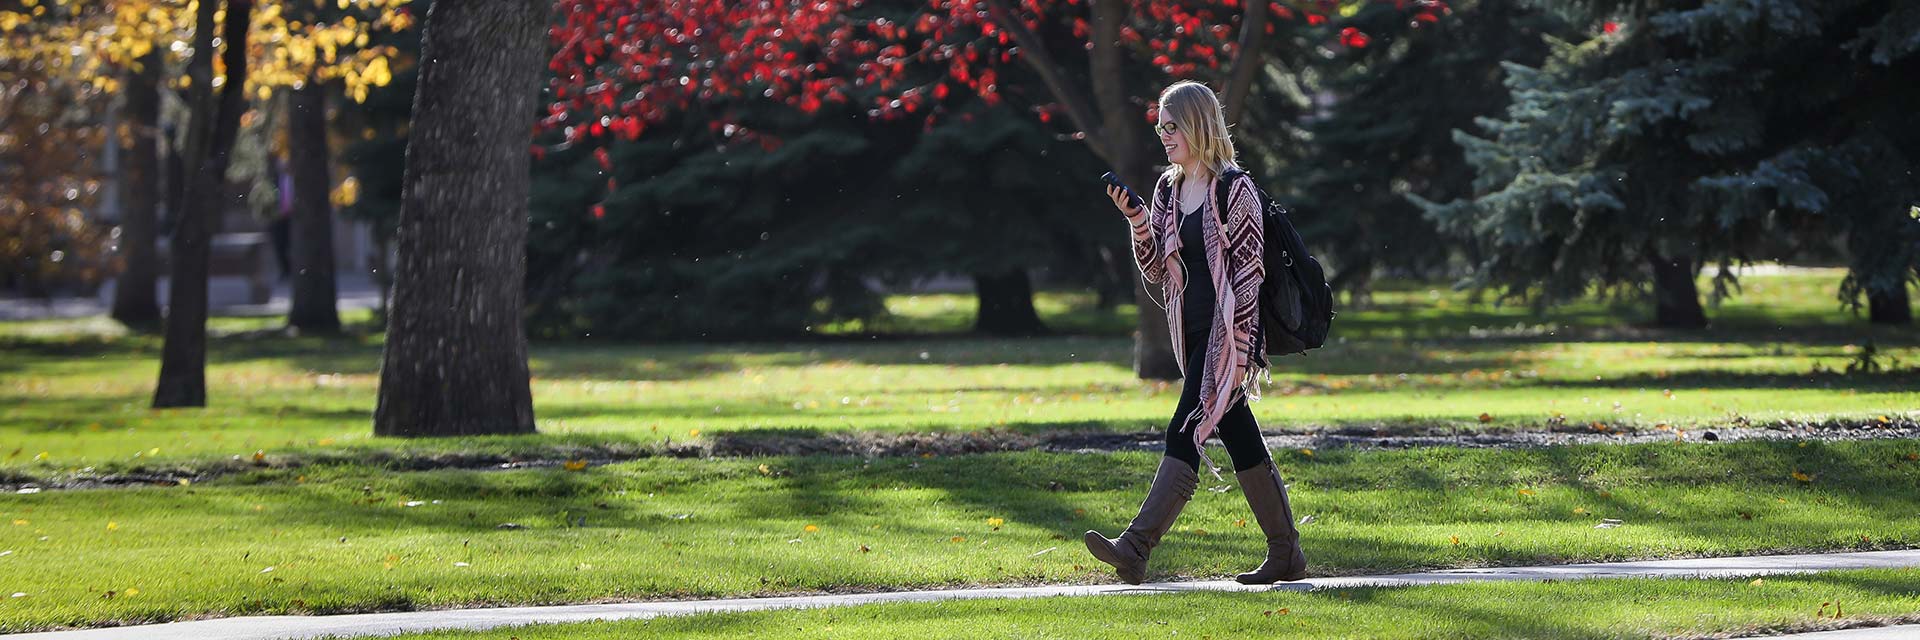 student walking on campus and checking phone